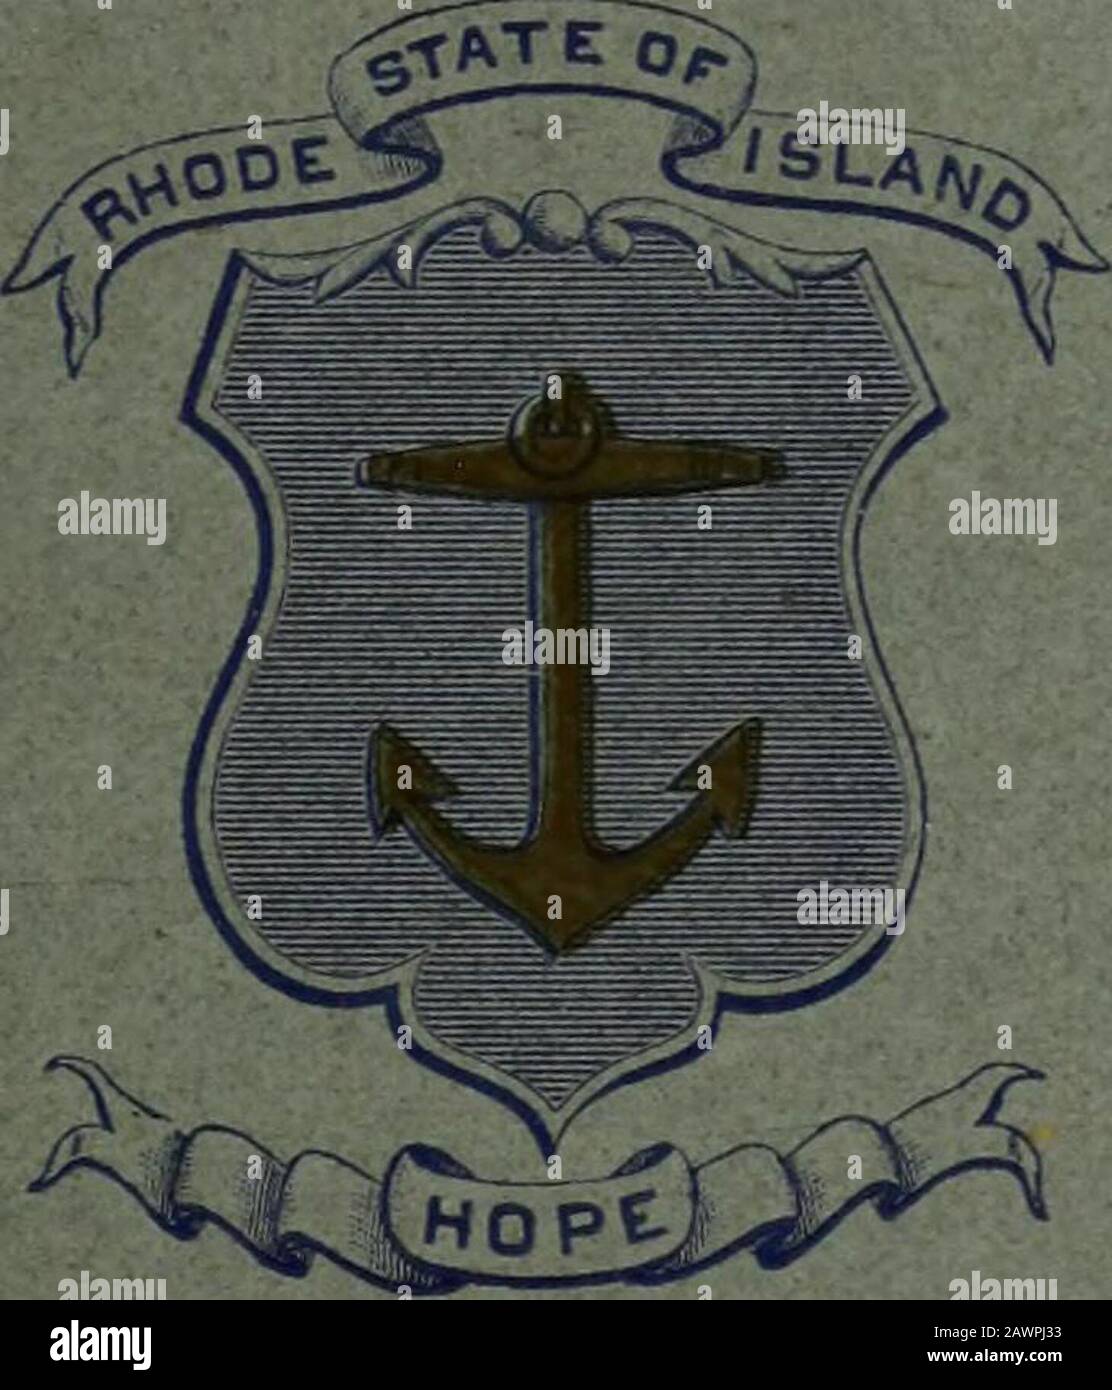 Bulletin of the University of Rhode Island : catalog number . 20, 21, 66 Military science and tactics 79 battalion organization 84 k requirements 79uniform 38,80 Mineralogy .77 Nature guard 16 PAGE. Organizations 86 agricultural club 86 alumni association 90 athletic board 86 student council 86 Y. M. C. A 87 Y. W. C. U 87 Debating society 86 Glee club 86 Lecture association 86 Physical training 83 Physics 32, 81 Physiography 34 Physiology 35, 84 Political economy 61 Poultry keeping— course 30, 50, 51 students 98 Prize, Kingston .91 Psychology 65 Reading-room 44 Registration 10 Religious influe Stock Photo